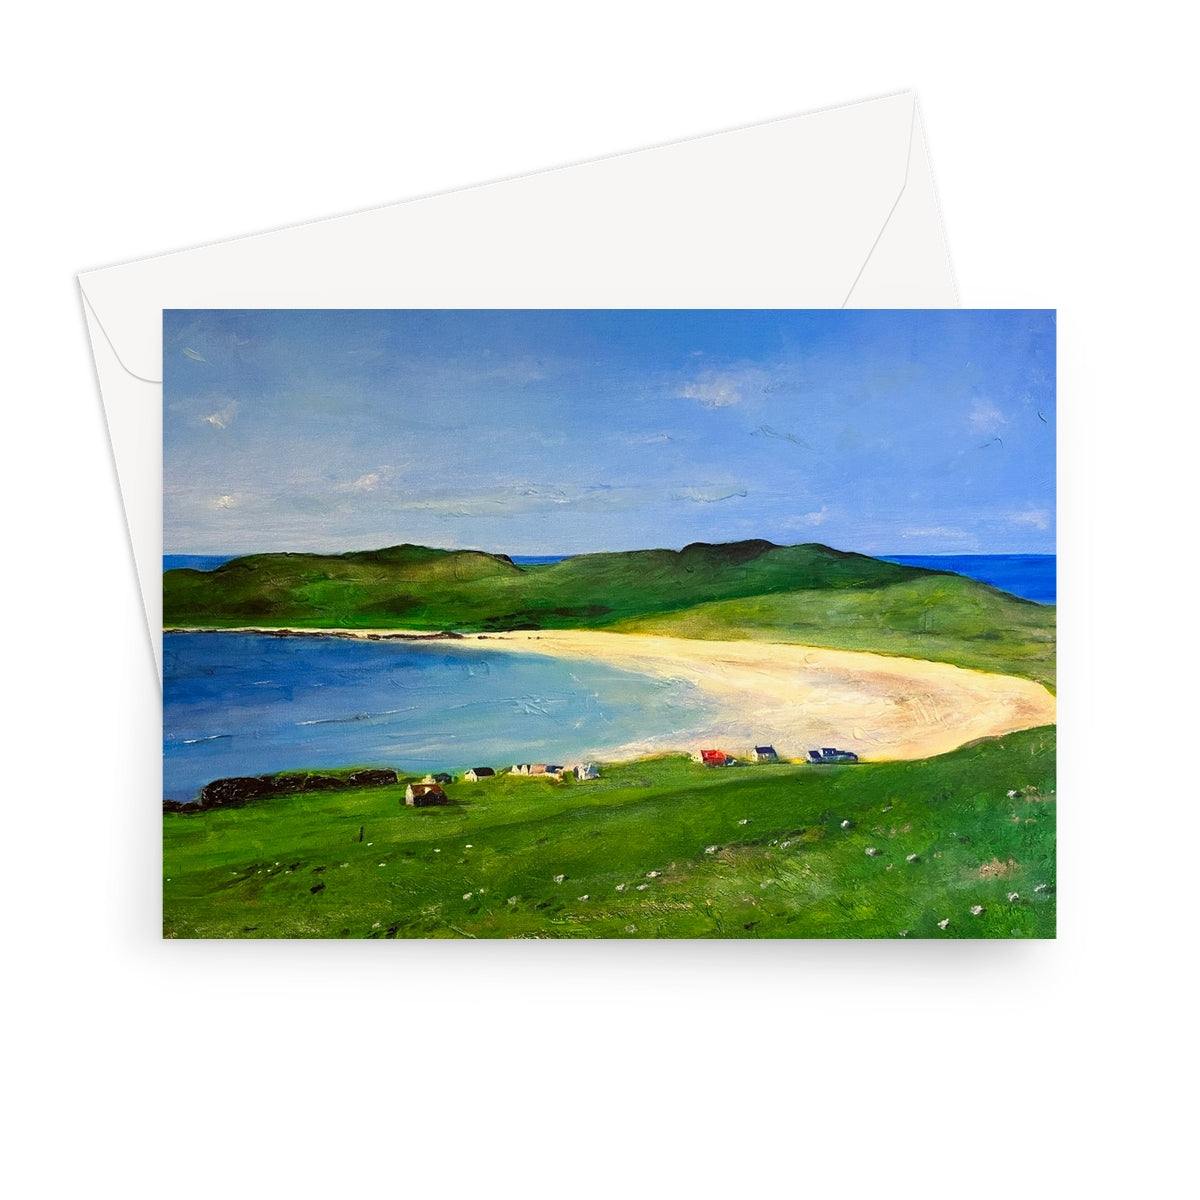 Balephuil Beach Tiree Art Gifts Greeting Card-Greetings Cards-Hebridean Islands Art Gallery-7"x5"-1 Card-Paintings, Prints, Homeware, Art Gifts From Scotland By Scottish Artist Kevin Hunter